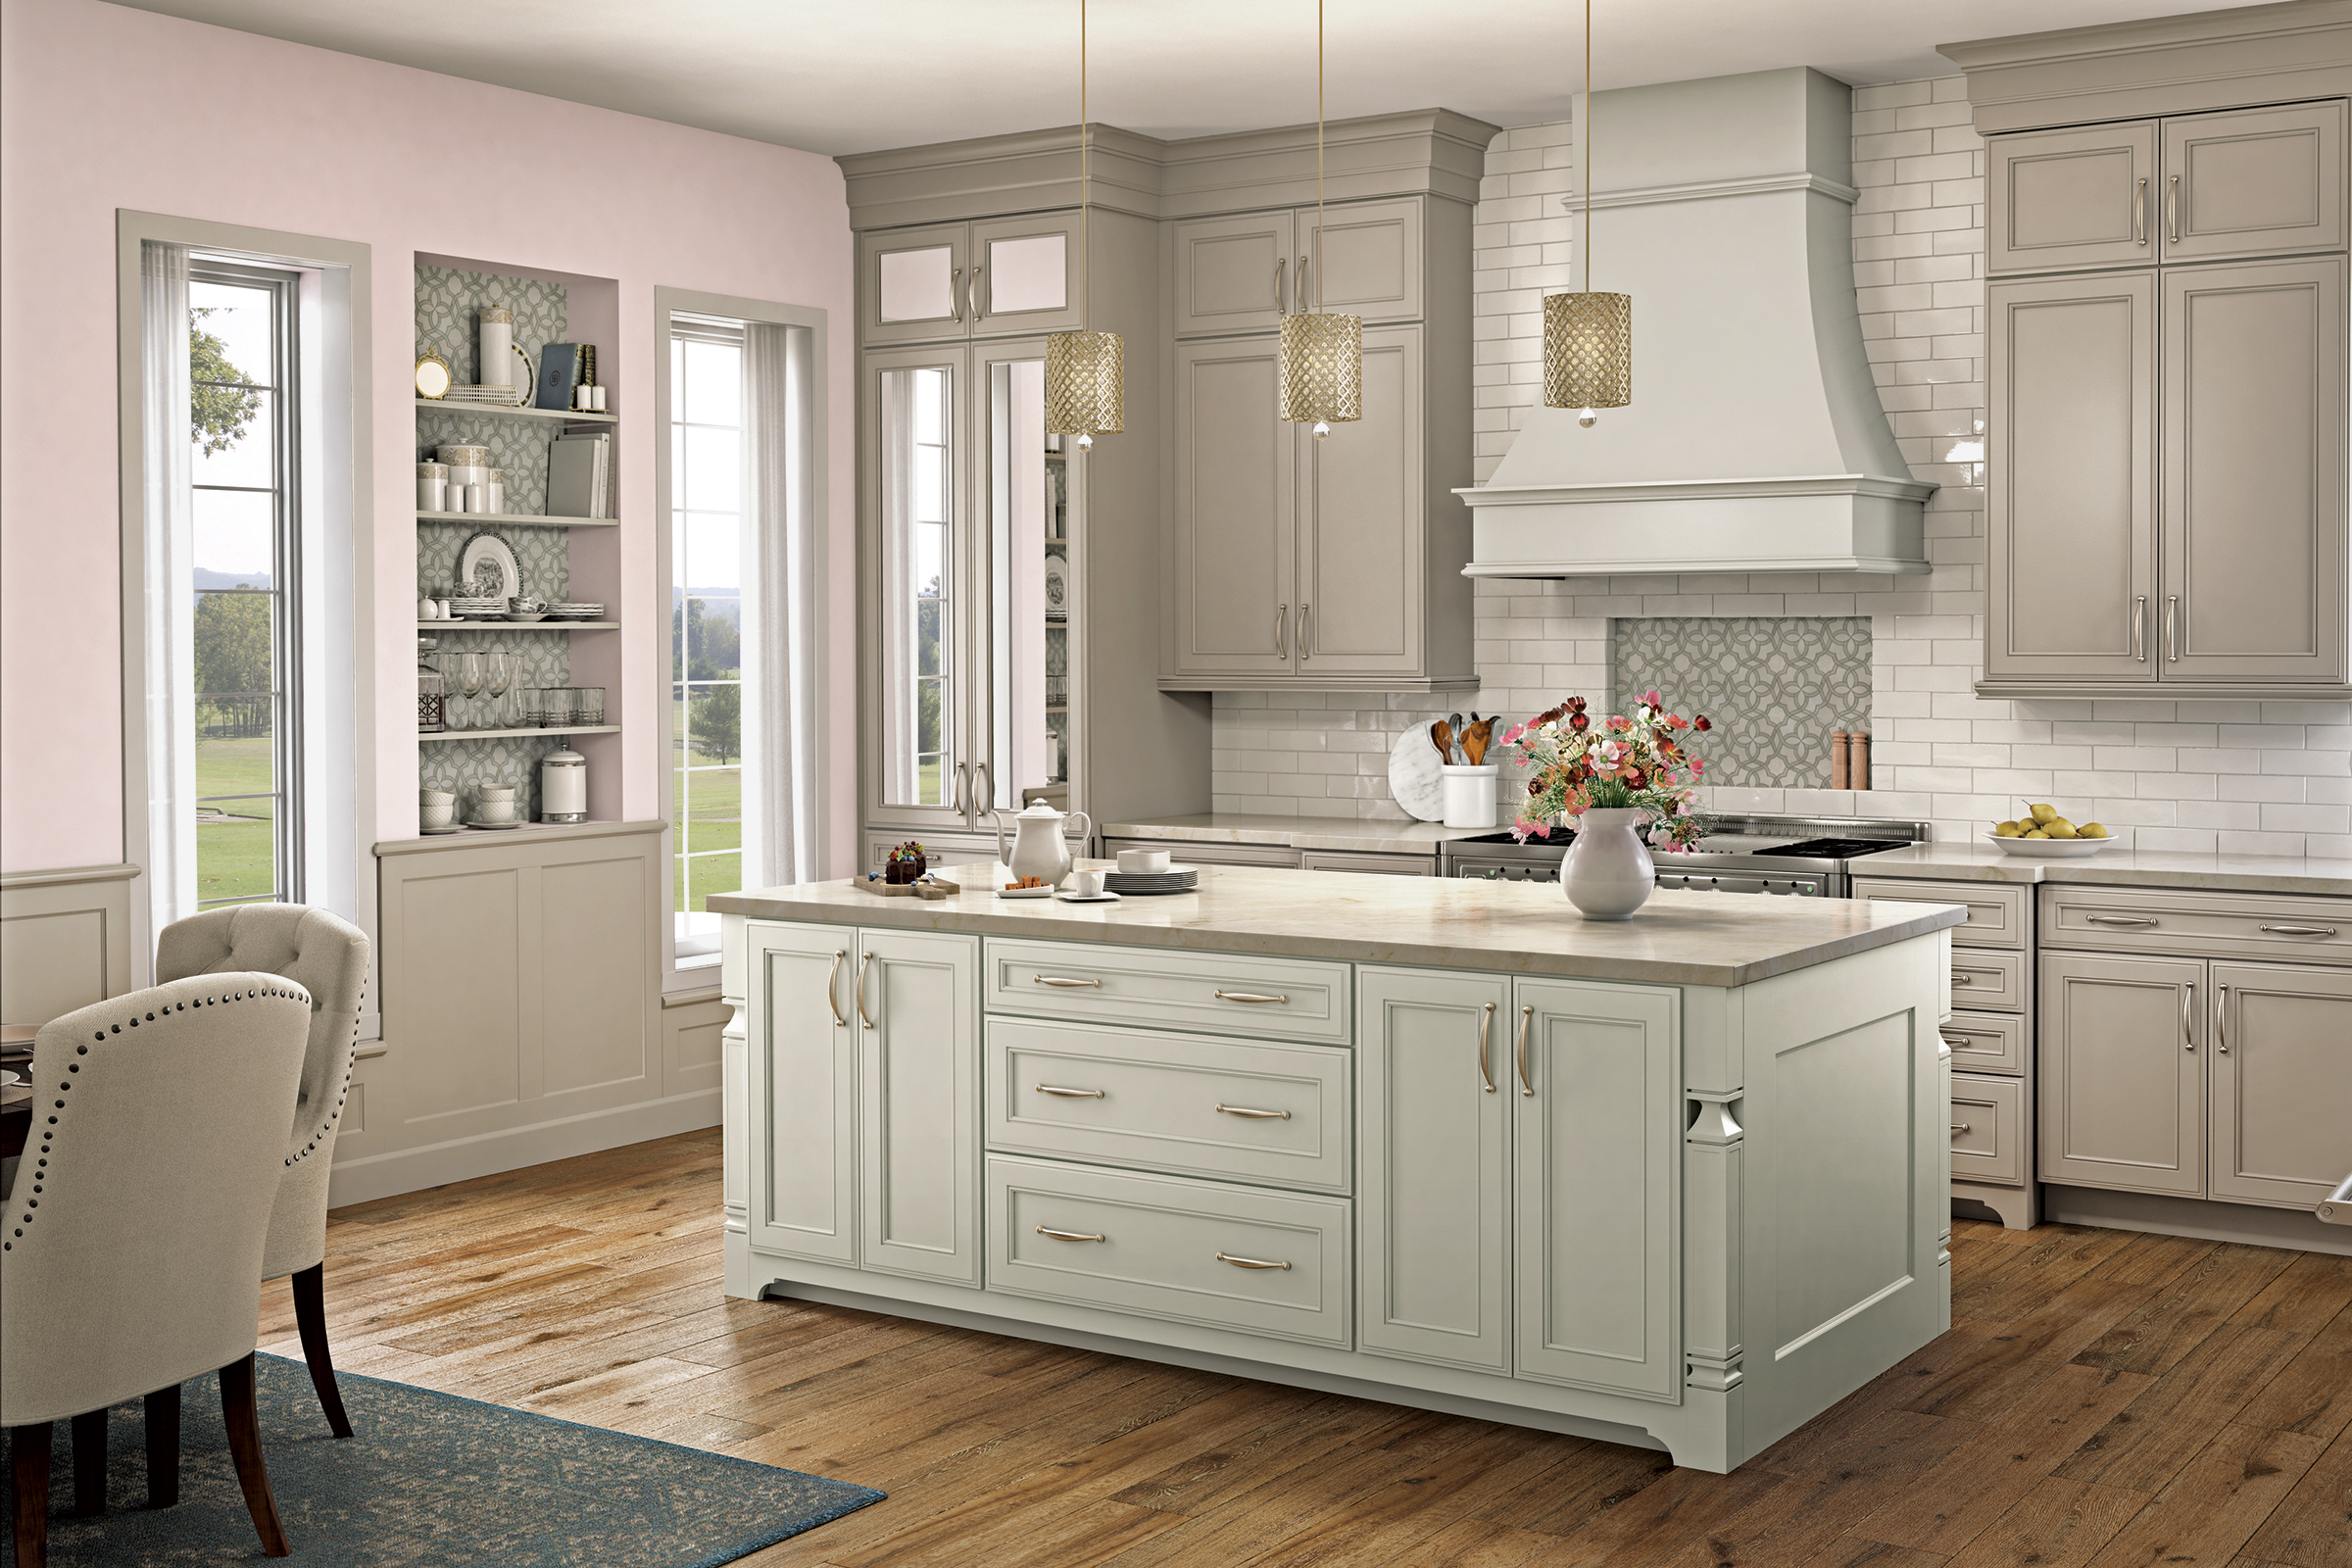 Warm neutral transitional kitchen with KraftMaid cabinets painted in shades of warm grey